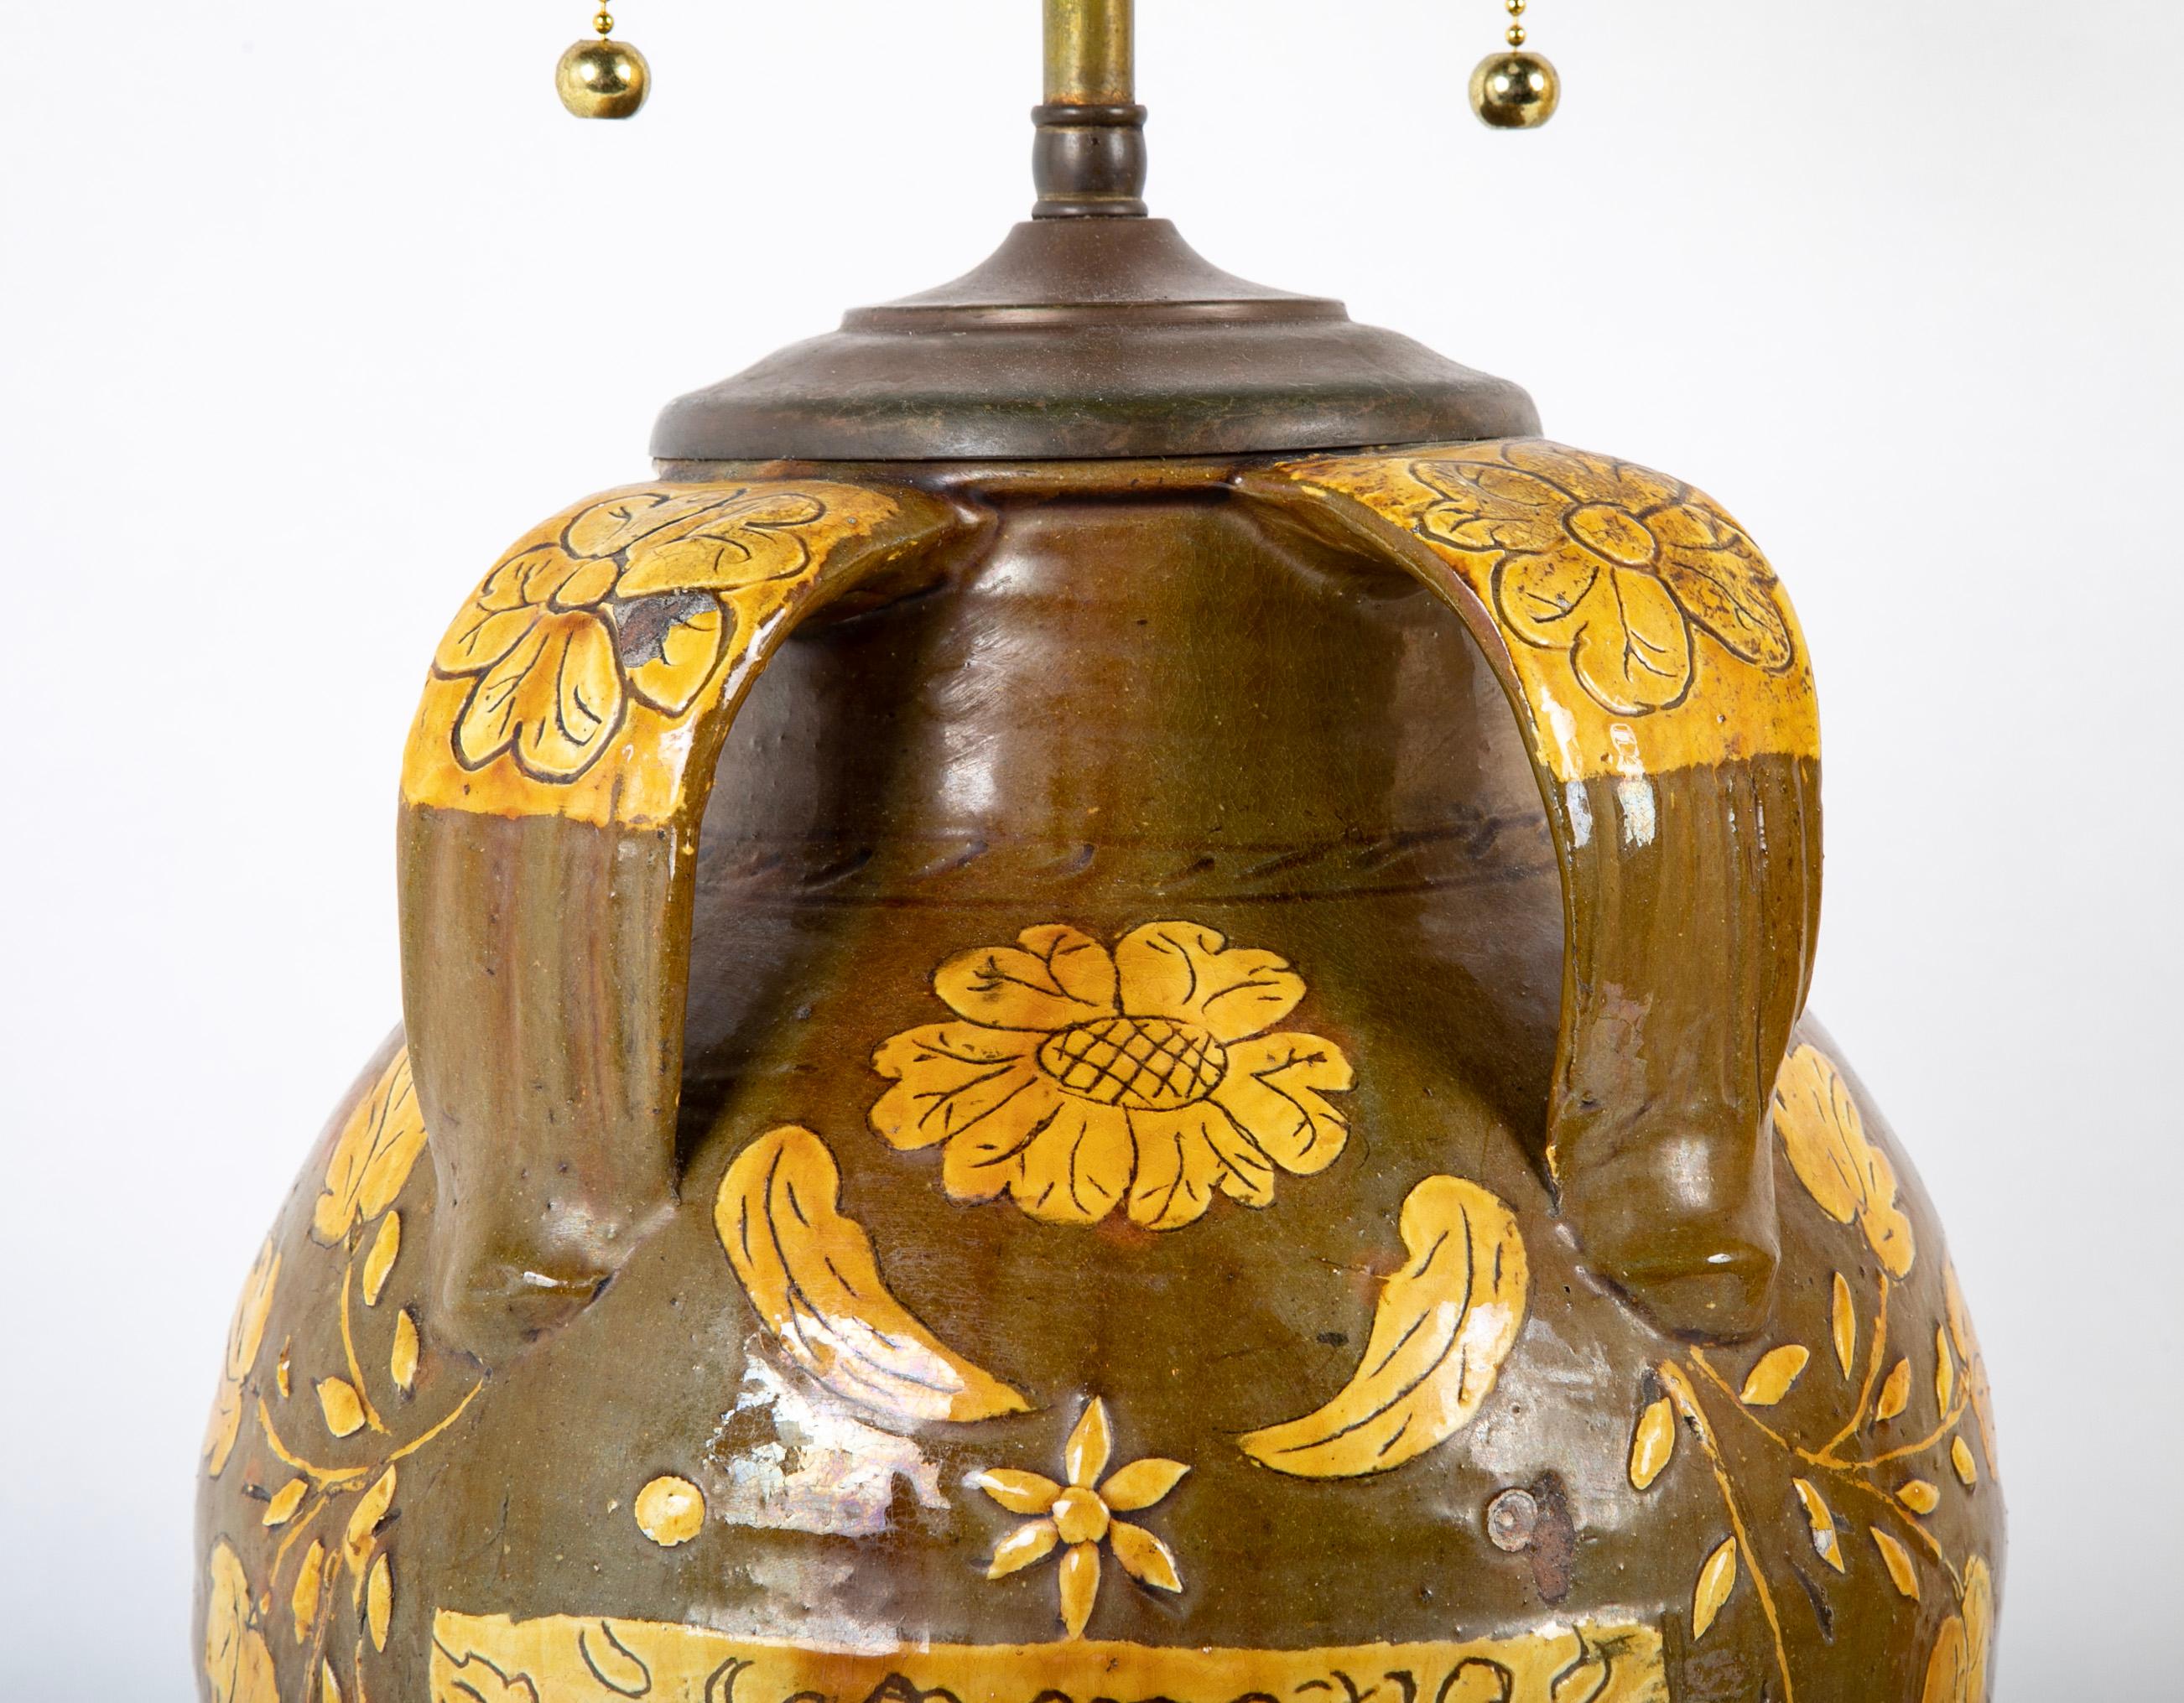 18th Century Spanish Glazed Ceramic Jar Mounted as a Table Lamp In Good Condition For Sale In Stamford, CT